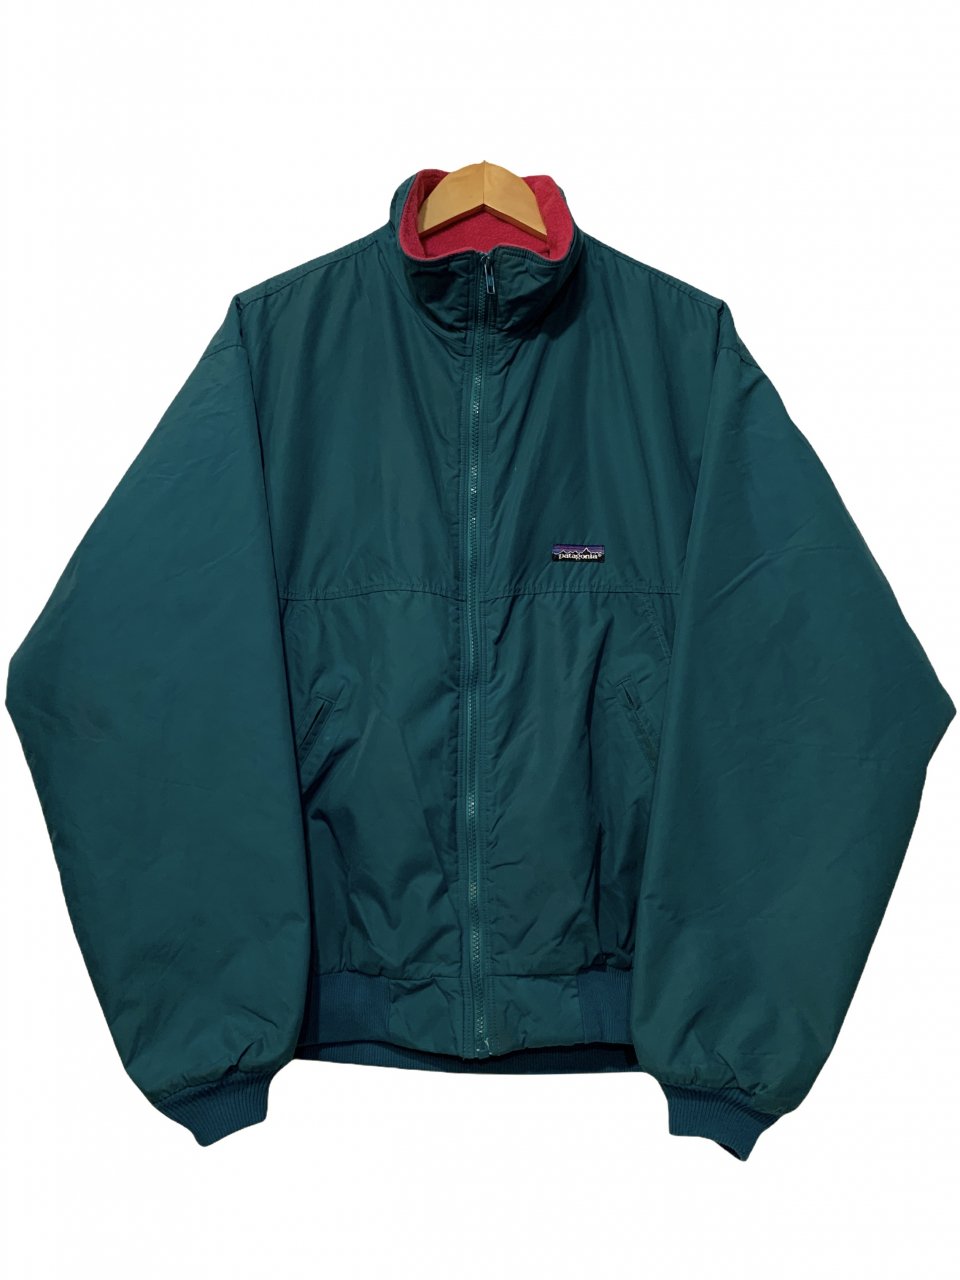 USA製 88年 patagonia Shelled Synchilla Jacket 緑ピンク L 80s ...